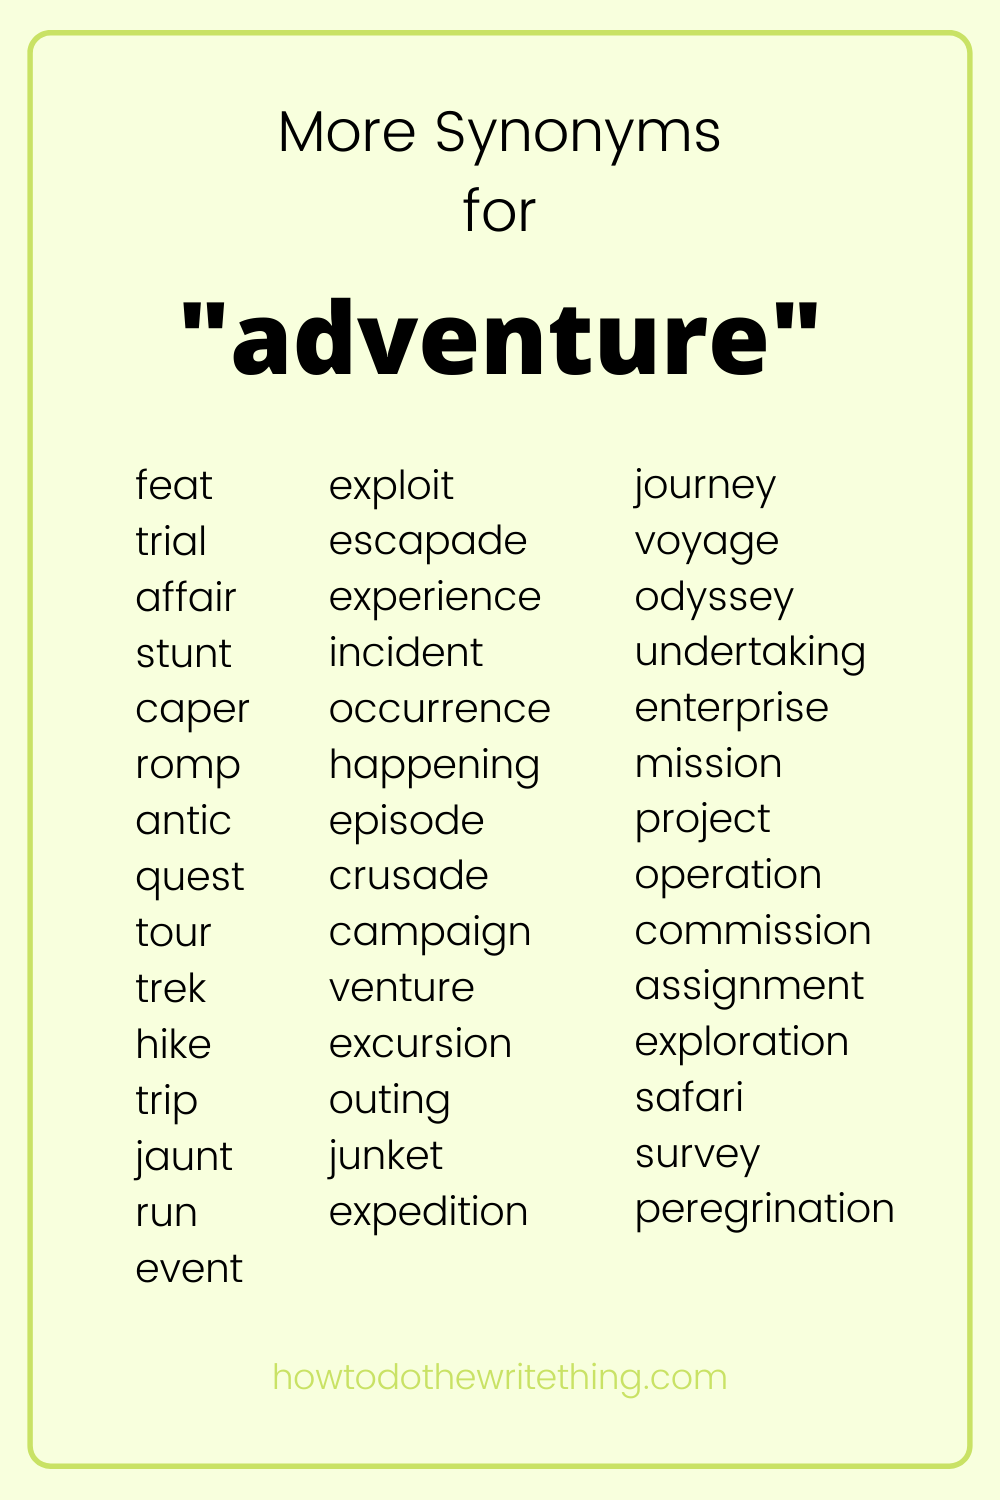 synonyms for adventure